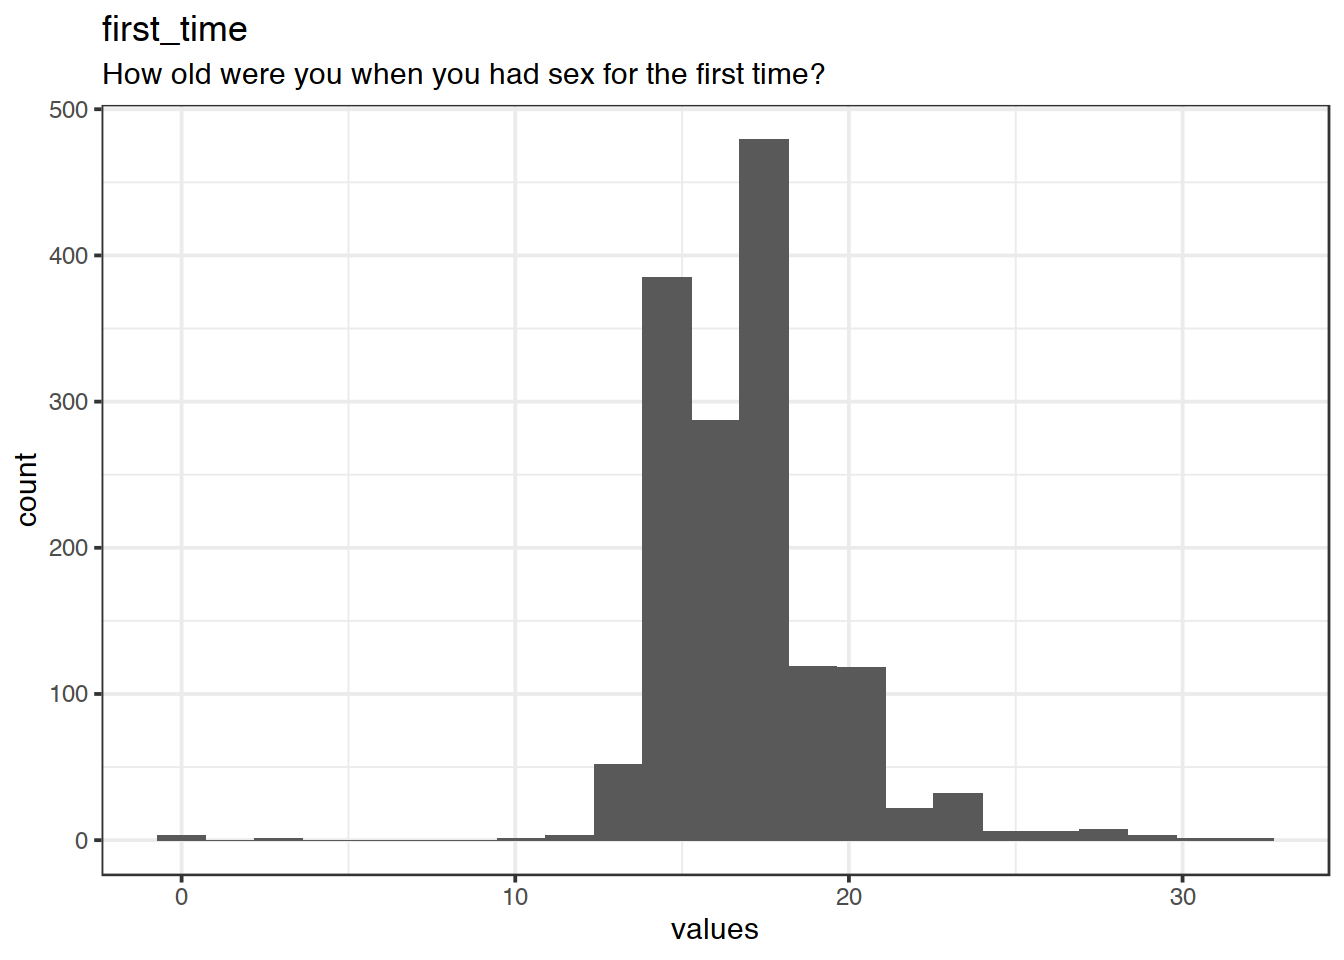 Distribution of values for first_time